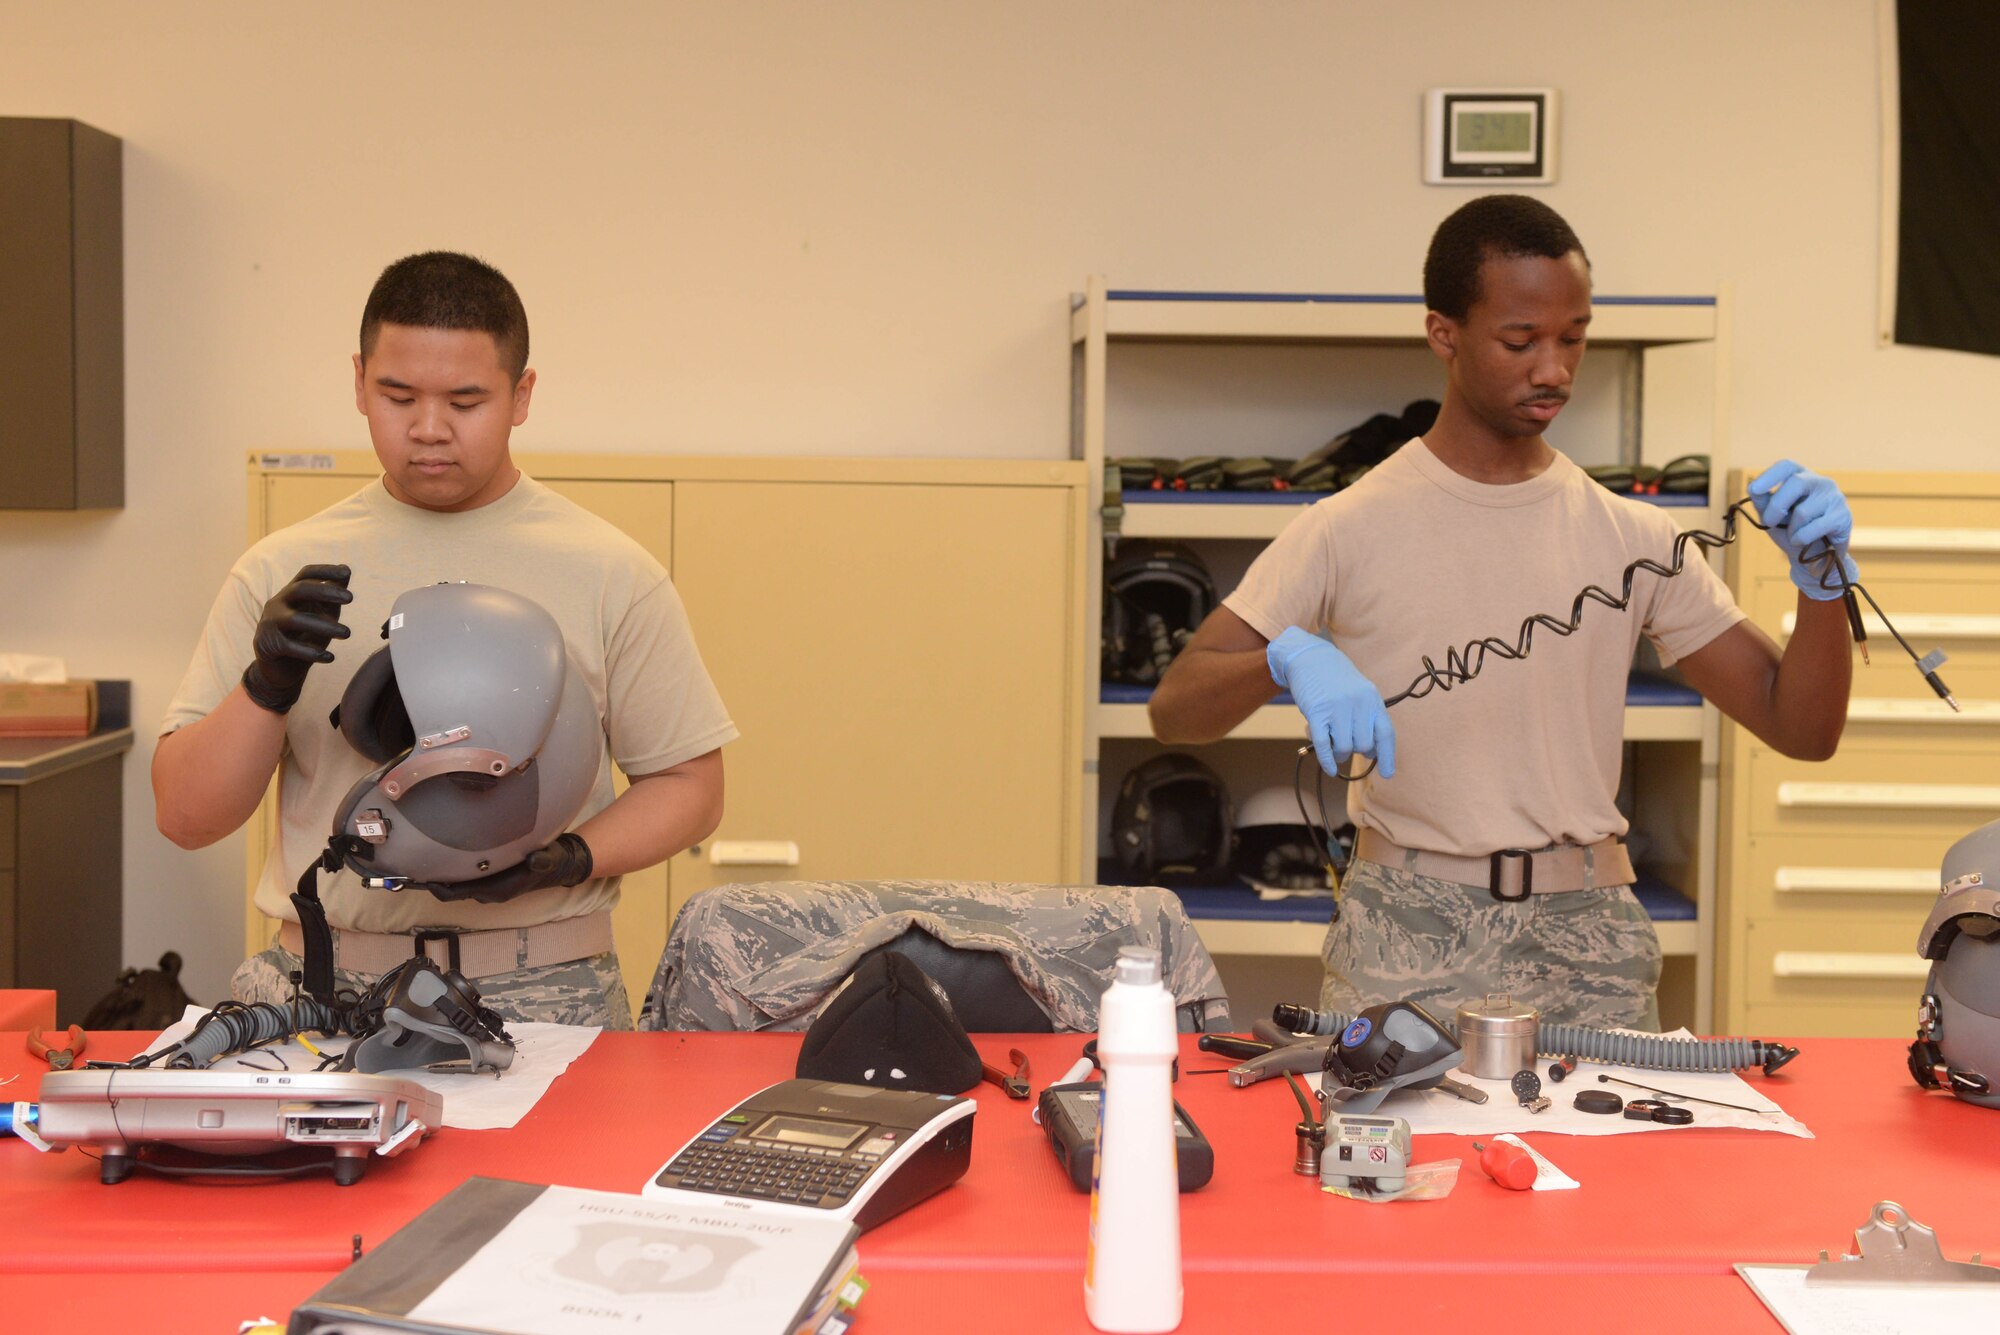 Airman 1st Class Bradley Fong, left, and Senior Airman Latron Robinson, aircrew flight equipment technicians from the 5th Operations Support Squadron, clean and inspect helmets at Minot Air Force Base, N.D., July 26, 2016.They inspected microphones, inhalation and exhalation valves, and helmet structure to ensure pilots have safe equipment. (U.S. Air Force photo/Airman 1st Class Jessica Weissman)